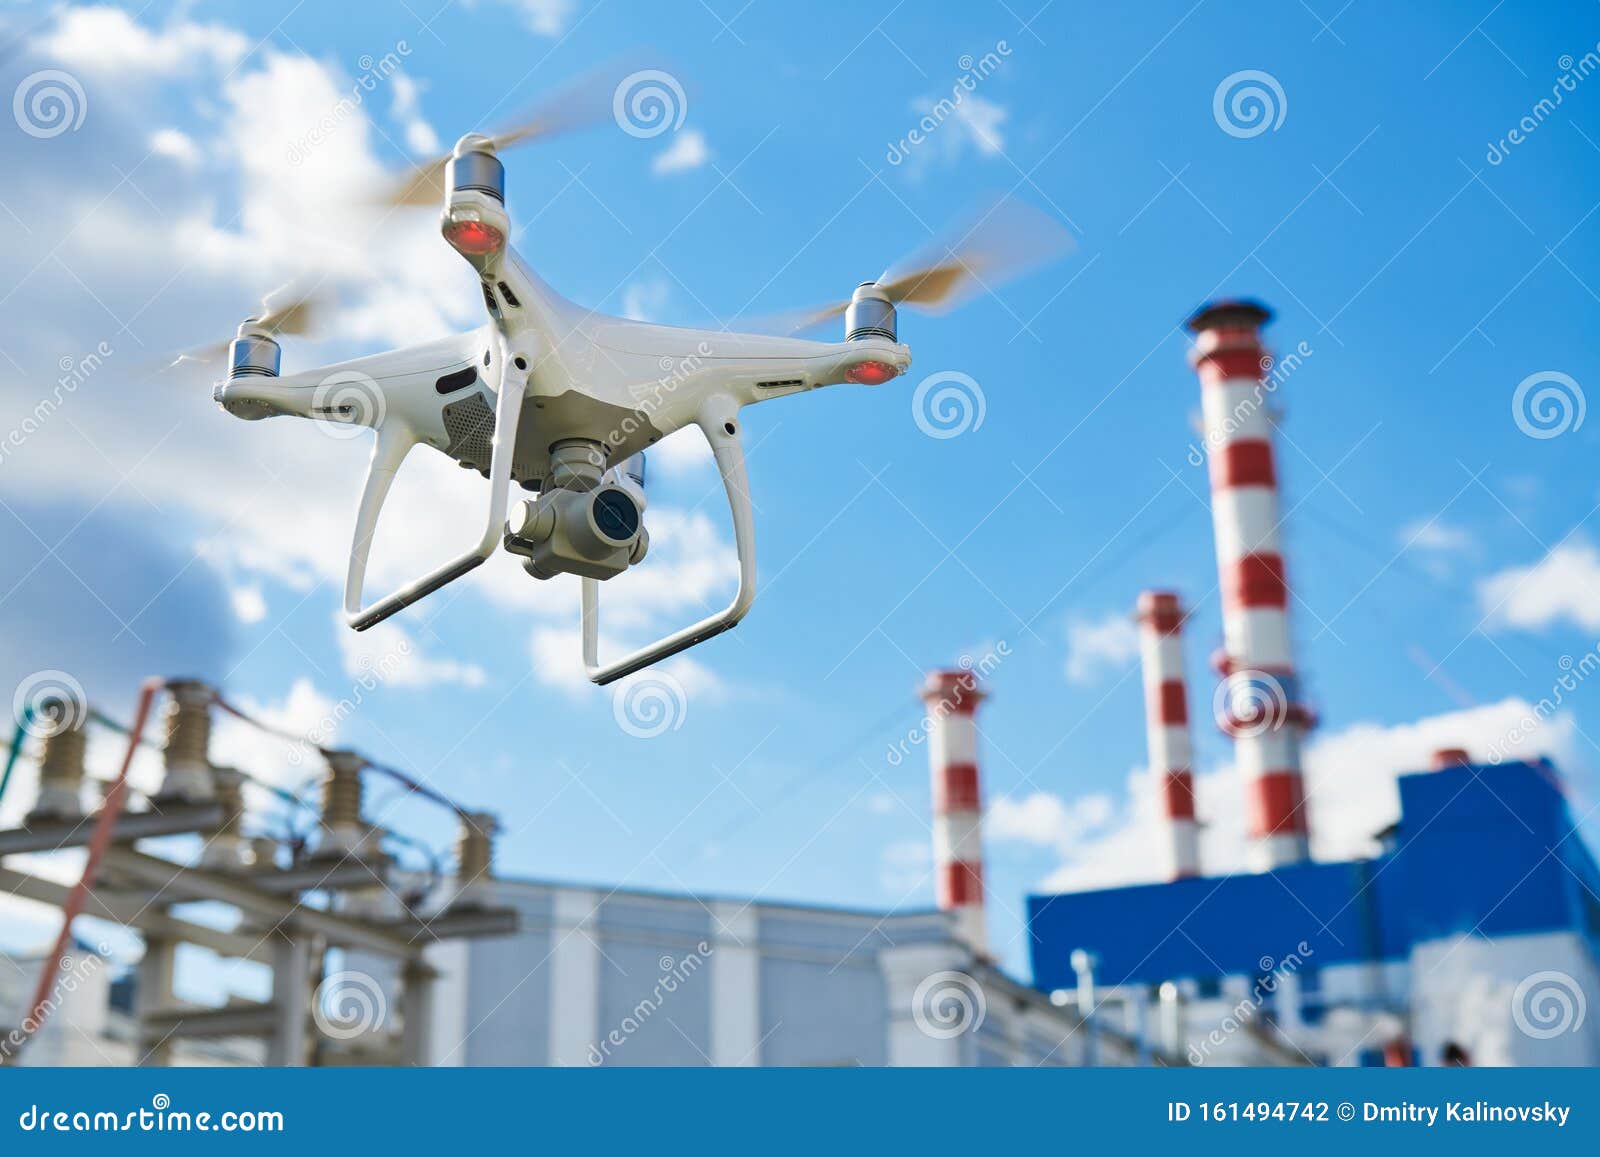 drone service. power electrical station inspection